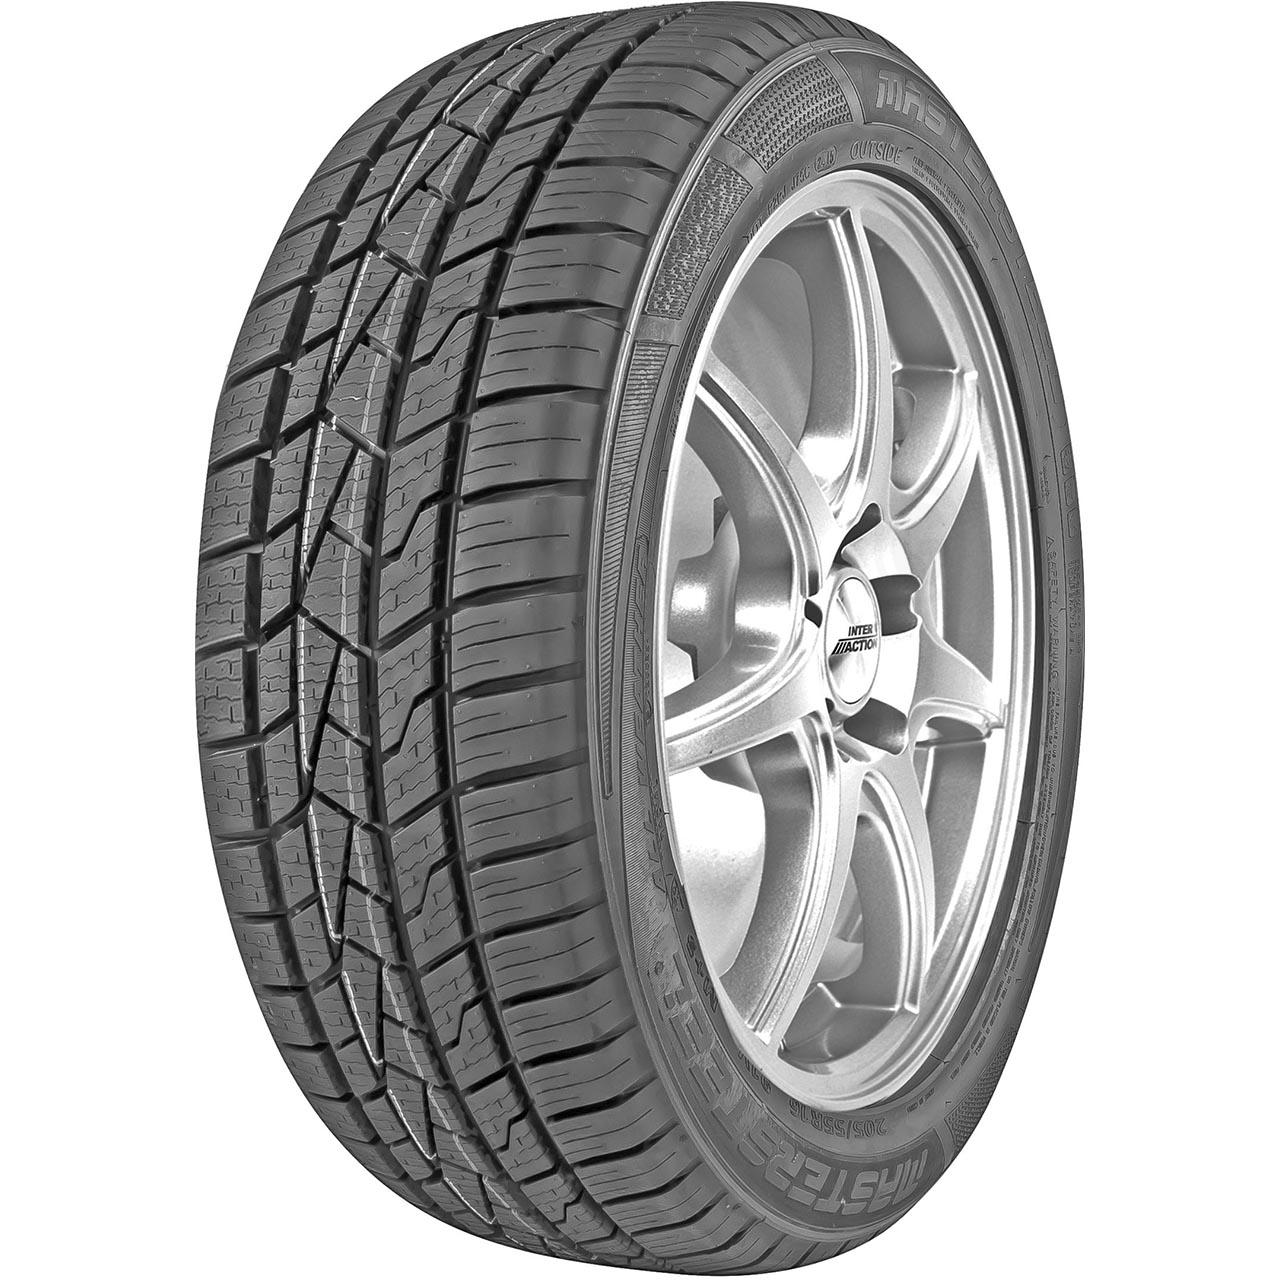 Mastersteel ALL Weather 185/55R14 80T